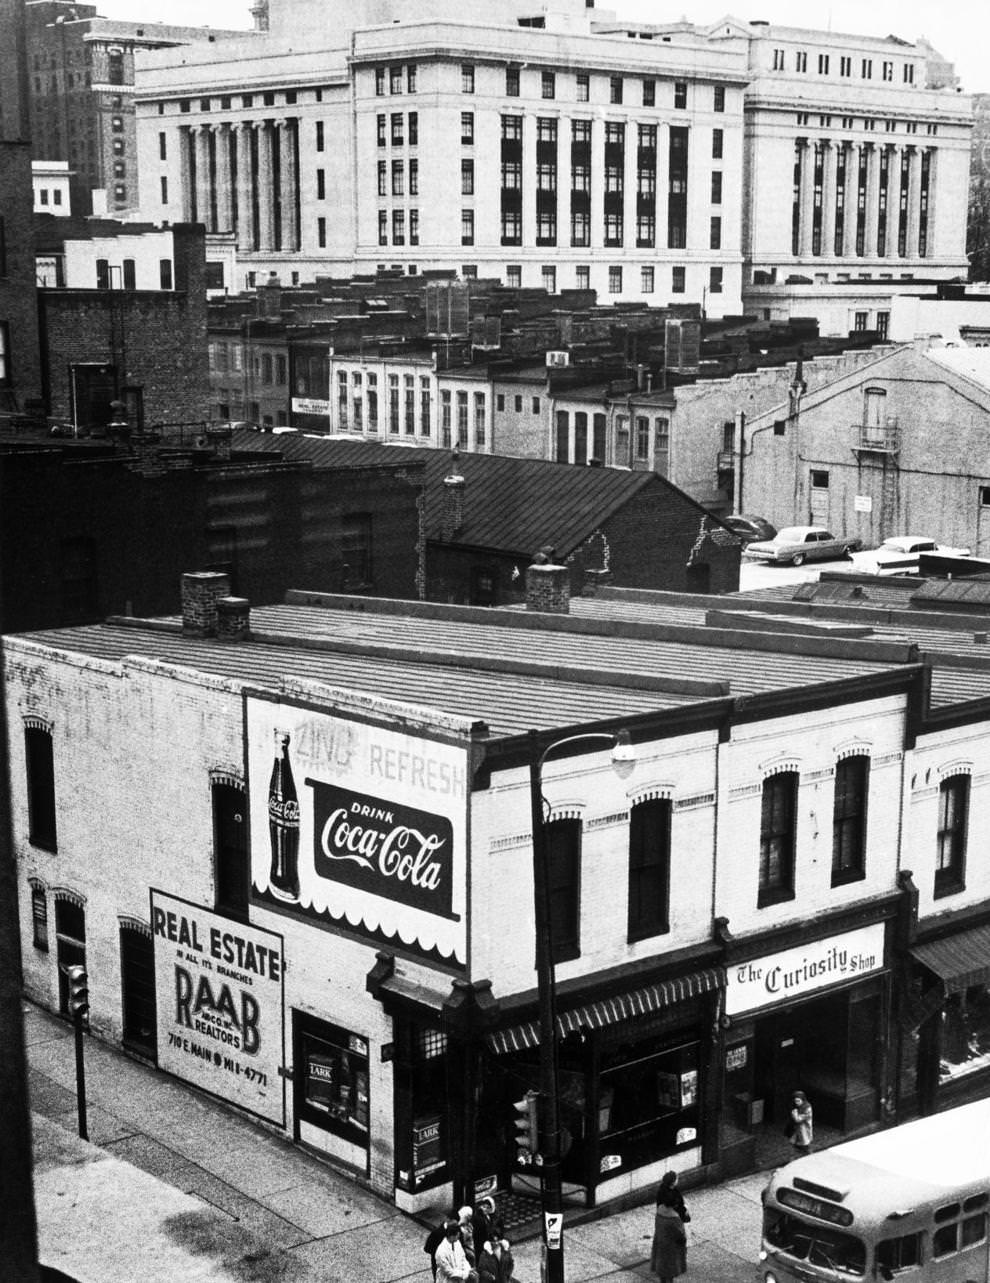 Plans were announced for an 18-story office building at Seventh and Main streets in downtown Richmond, which would displace smaller shops and buildings at the site, 1964.